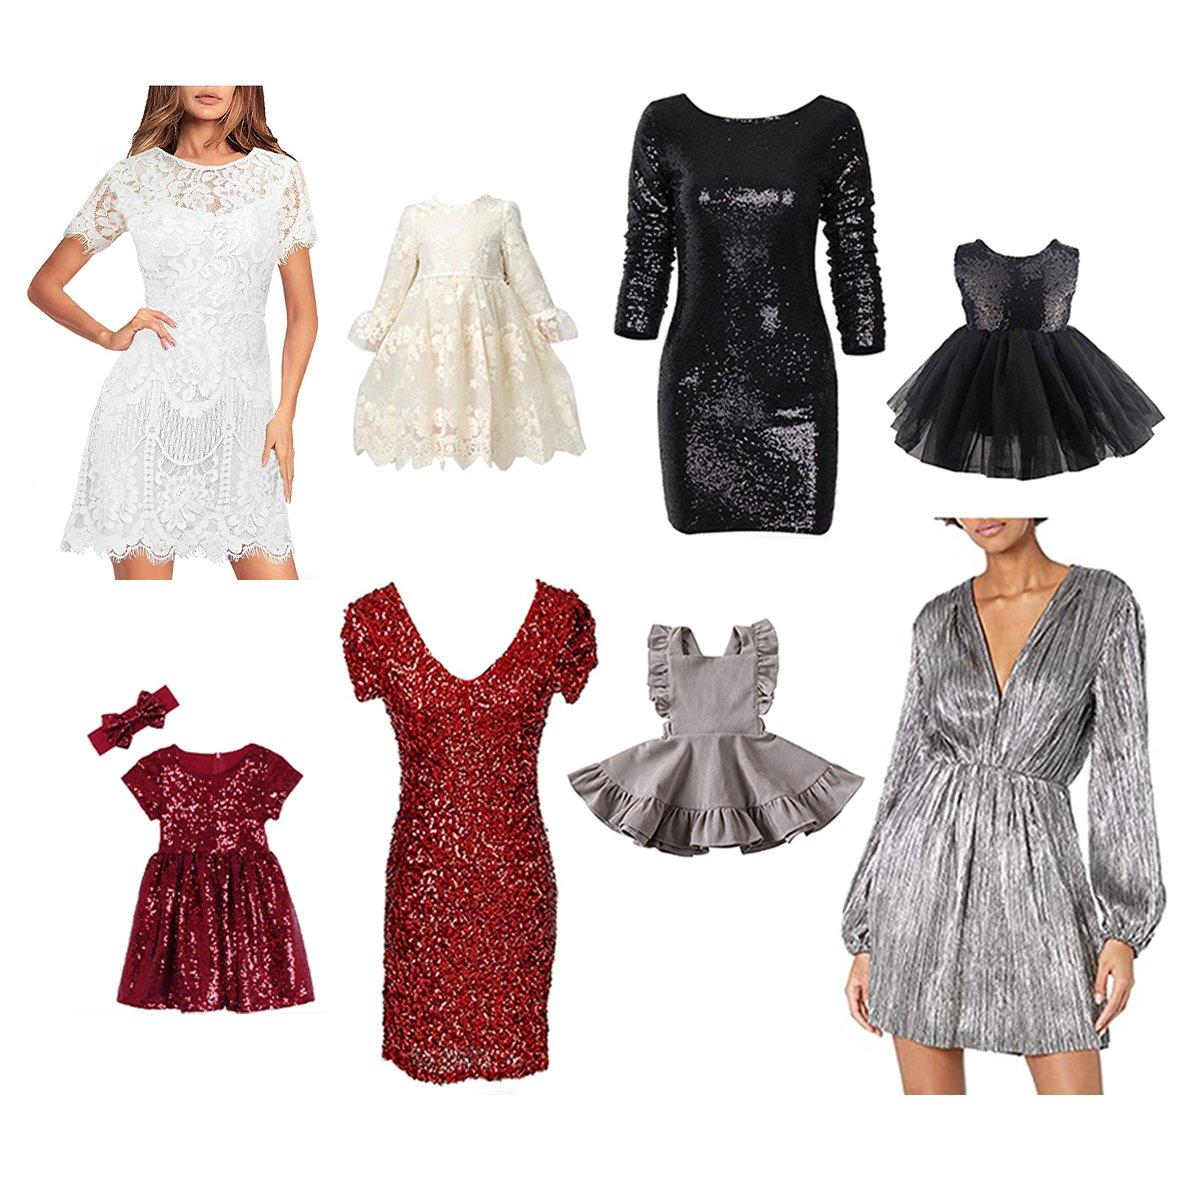 Save and Splurge Holiday Edition: My Favorite Amazon Party Dresses for NYE